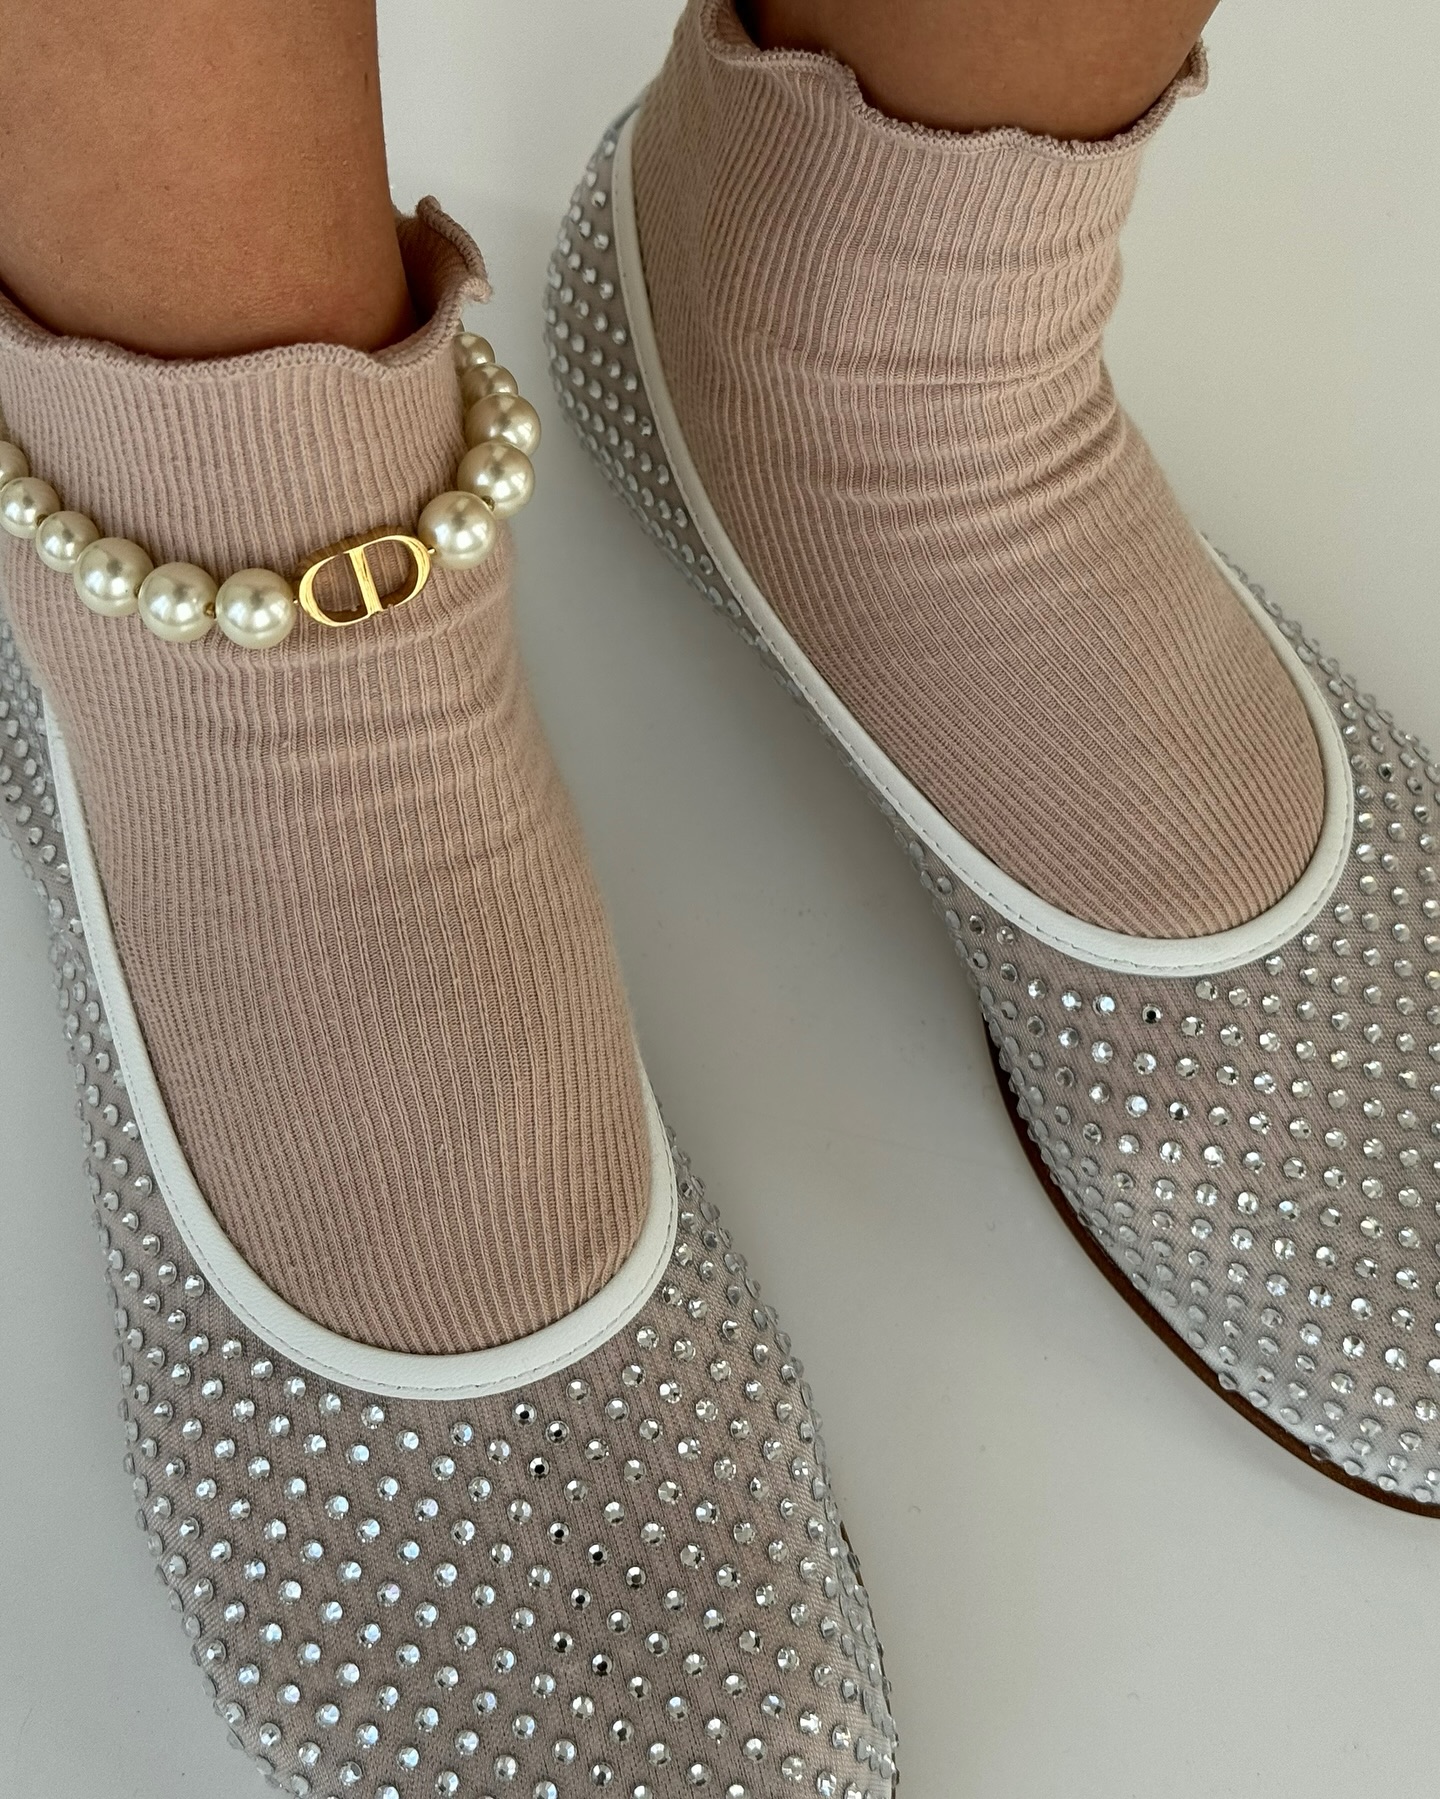 Influencer wears a pearl anklet.